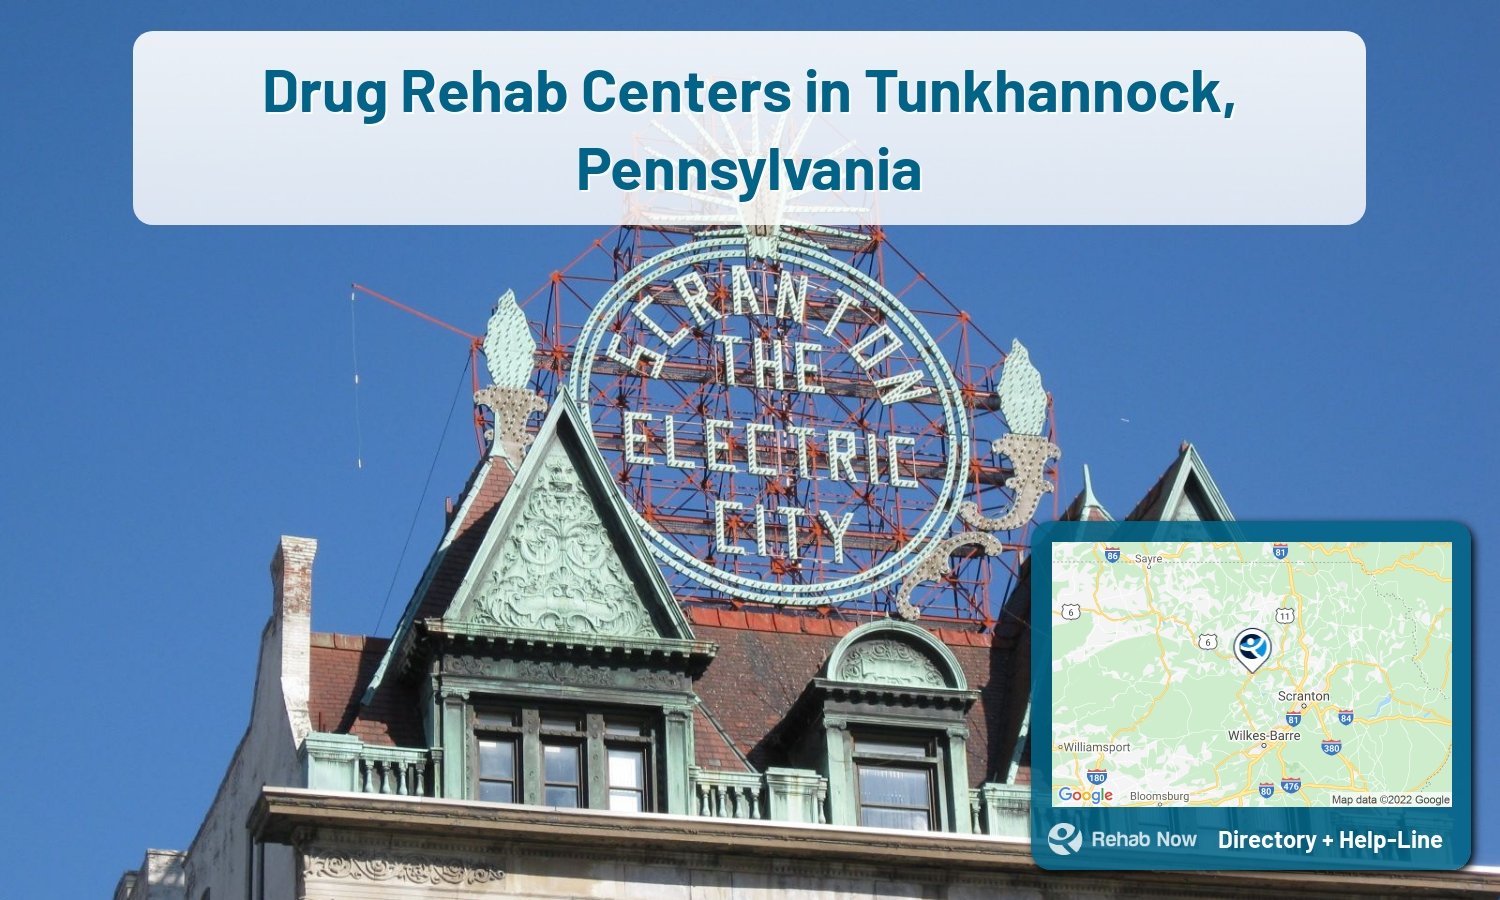 View options, availability, treatment methods, and more, for drug rehab and alcohol treatment in Tunkhannock, Pennsylvania